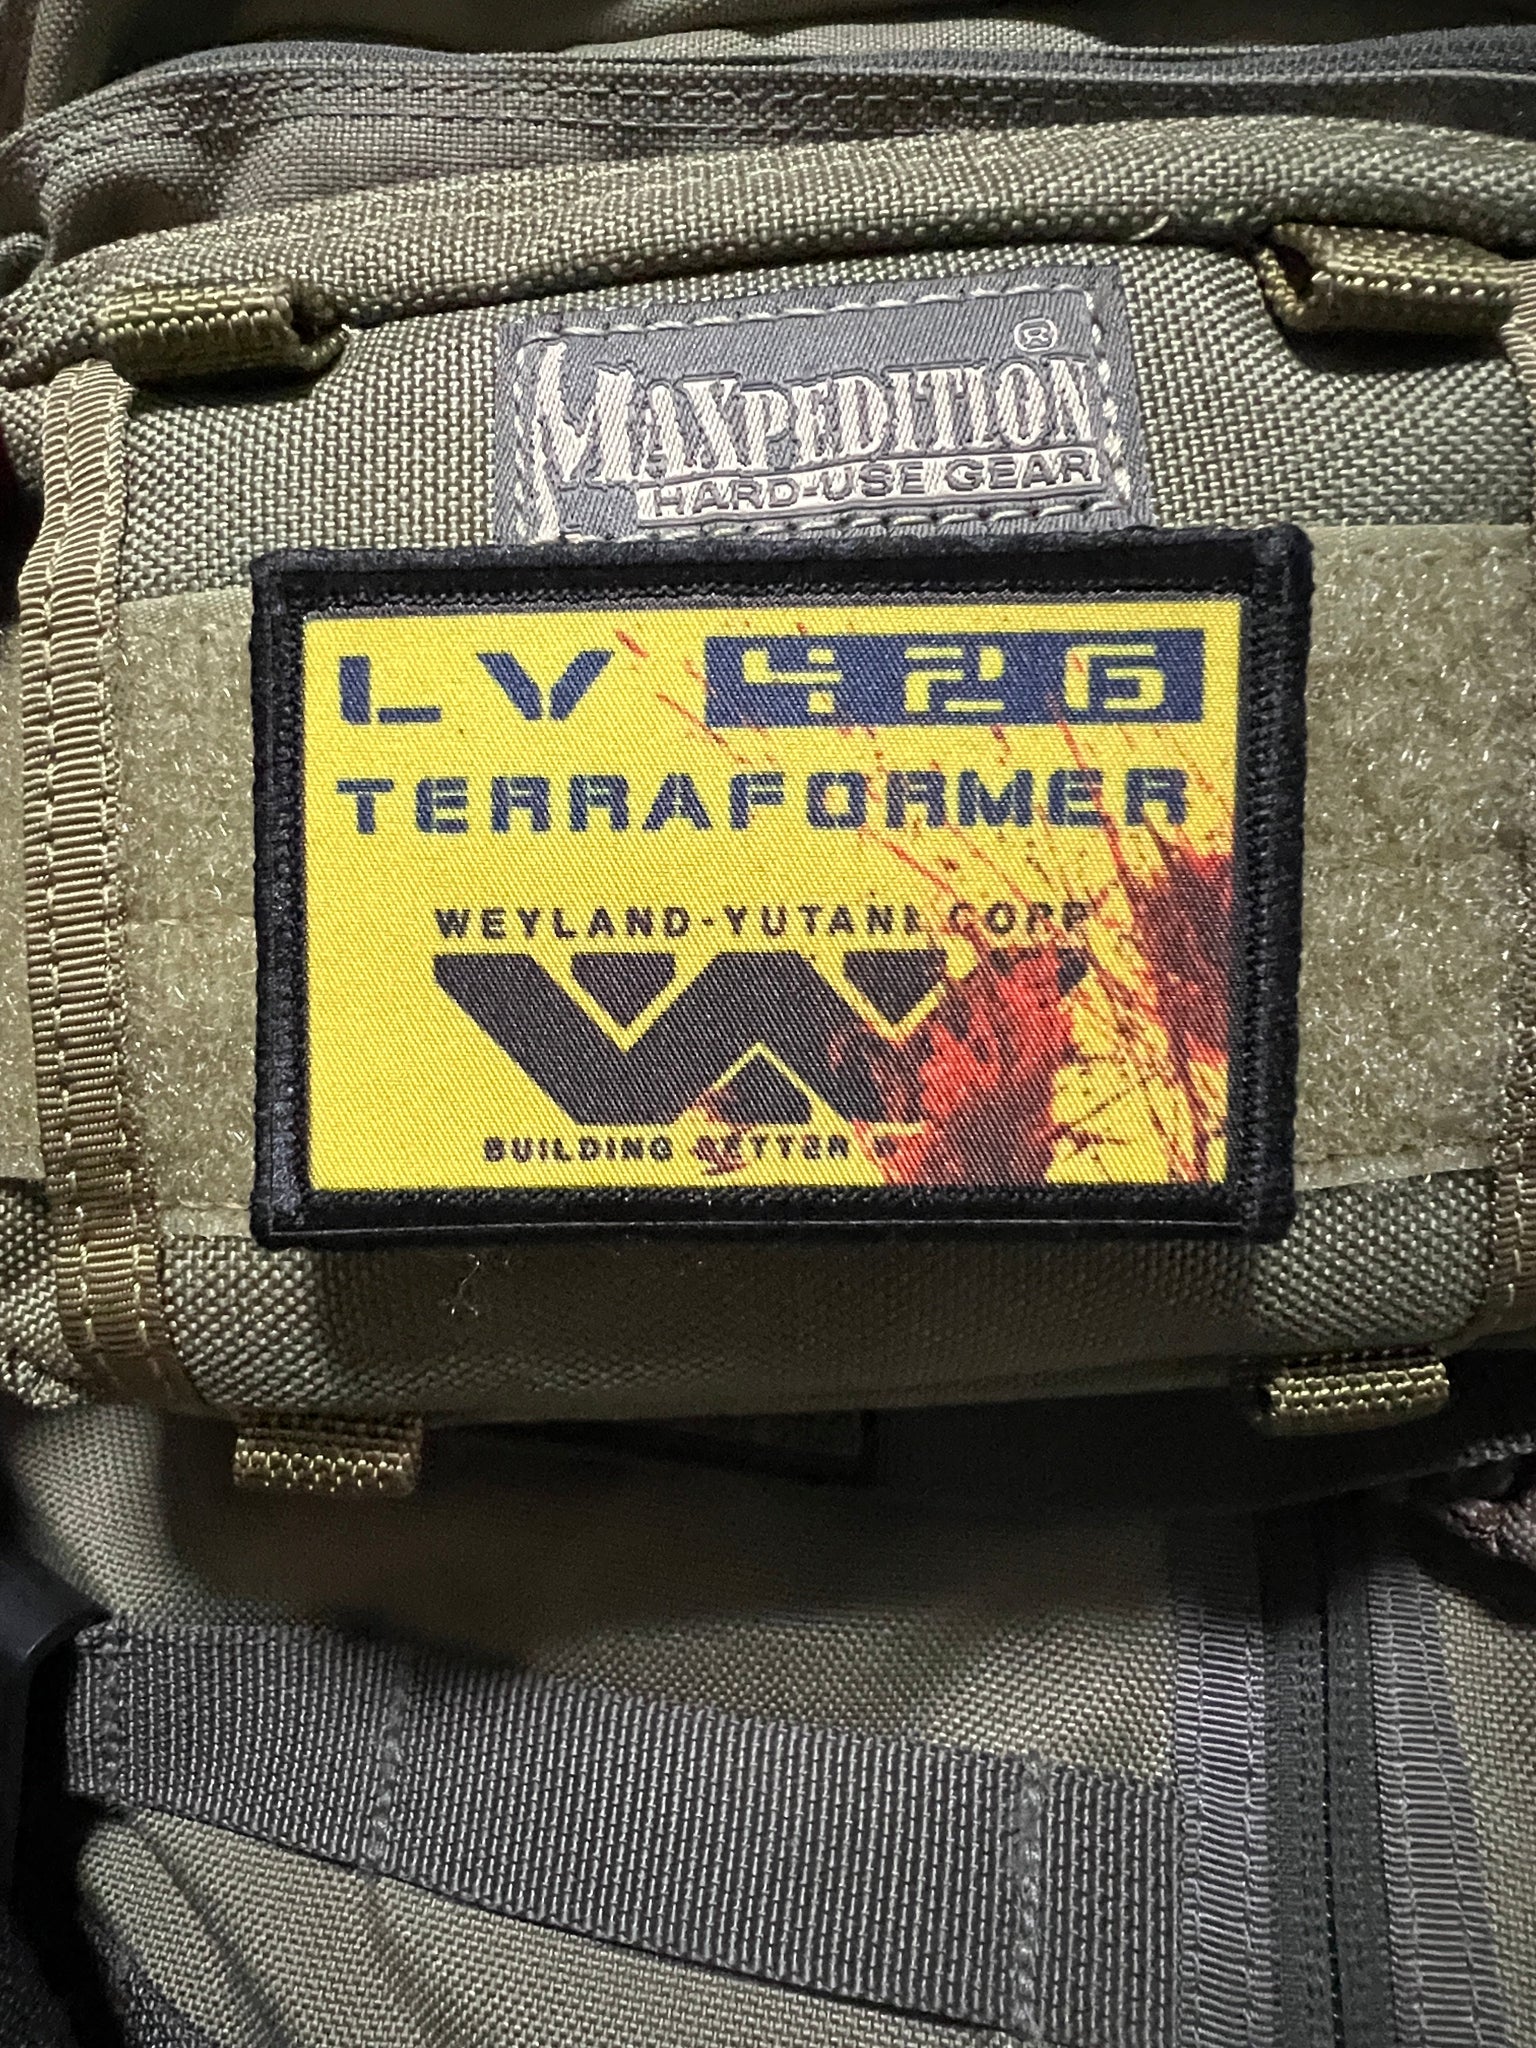  LV-426 Hadley's Hope Aliens Movie Patch. Perfect for Your  Tactical Military Army Gear, Backpack, Operator Baseball Cap, Plate Carrier  or Vest. 2x3 Hook Patch. Made in The USA : Clothing, Shoes